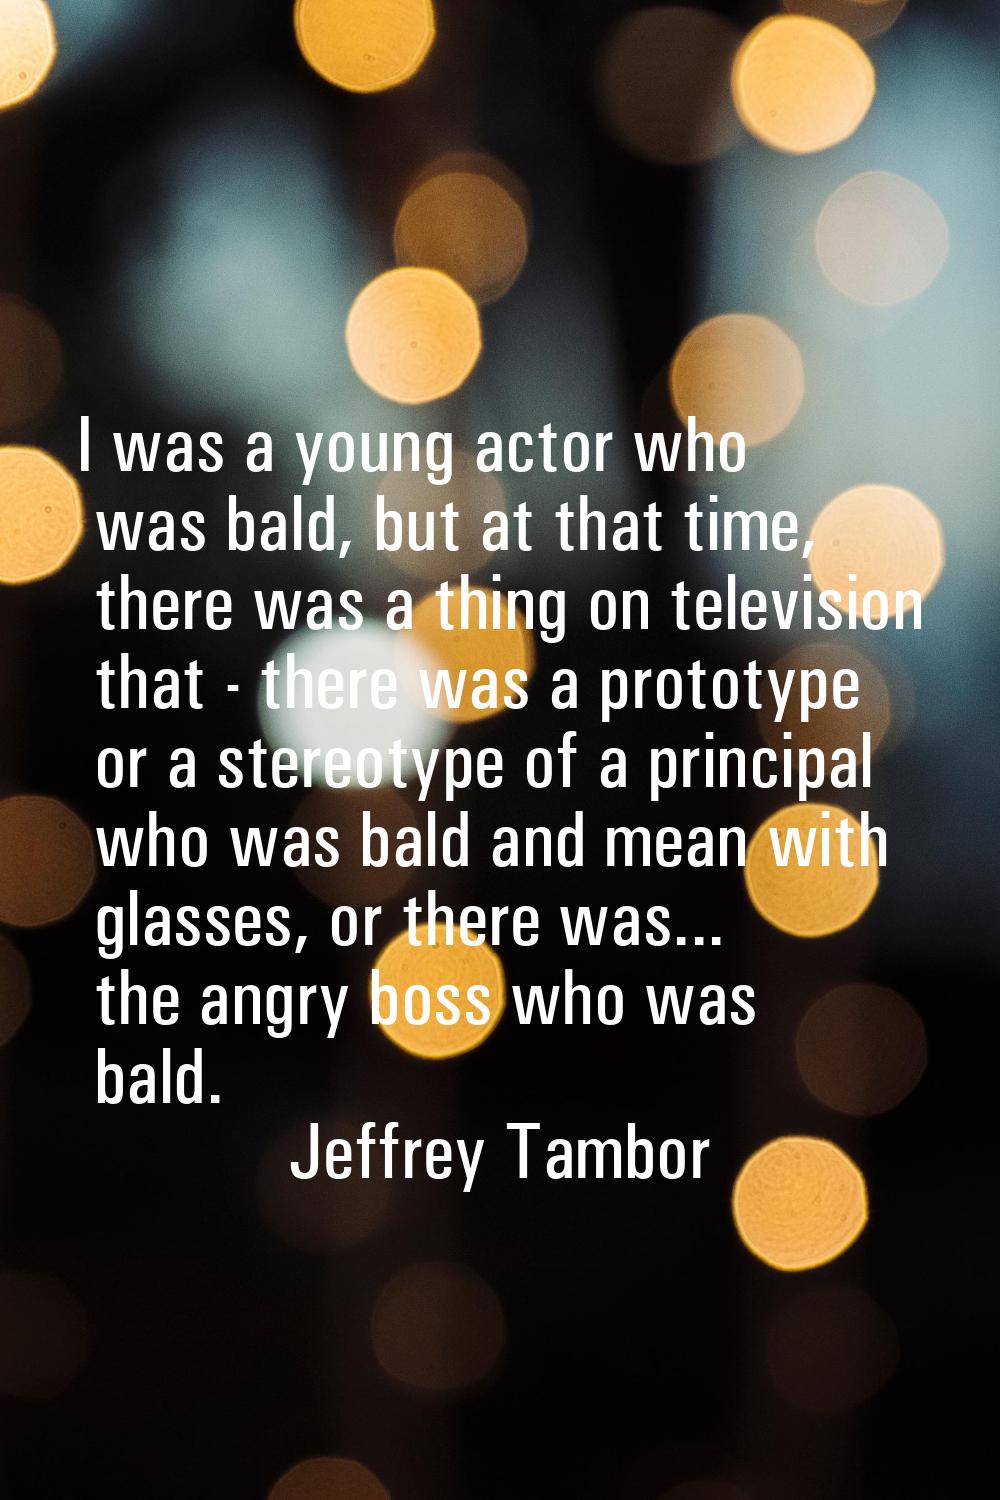 I was a young actor who was bald, but at that time, there was a thing on television that - there wa